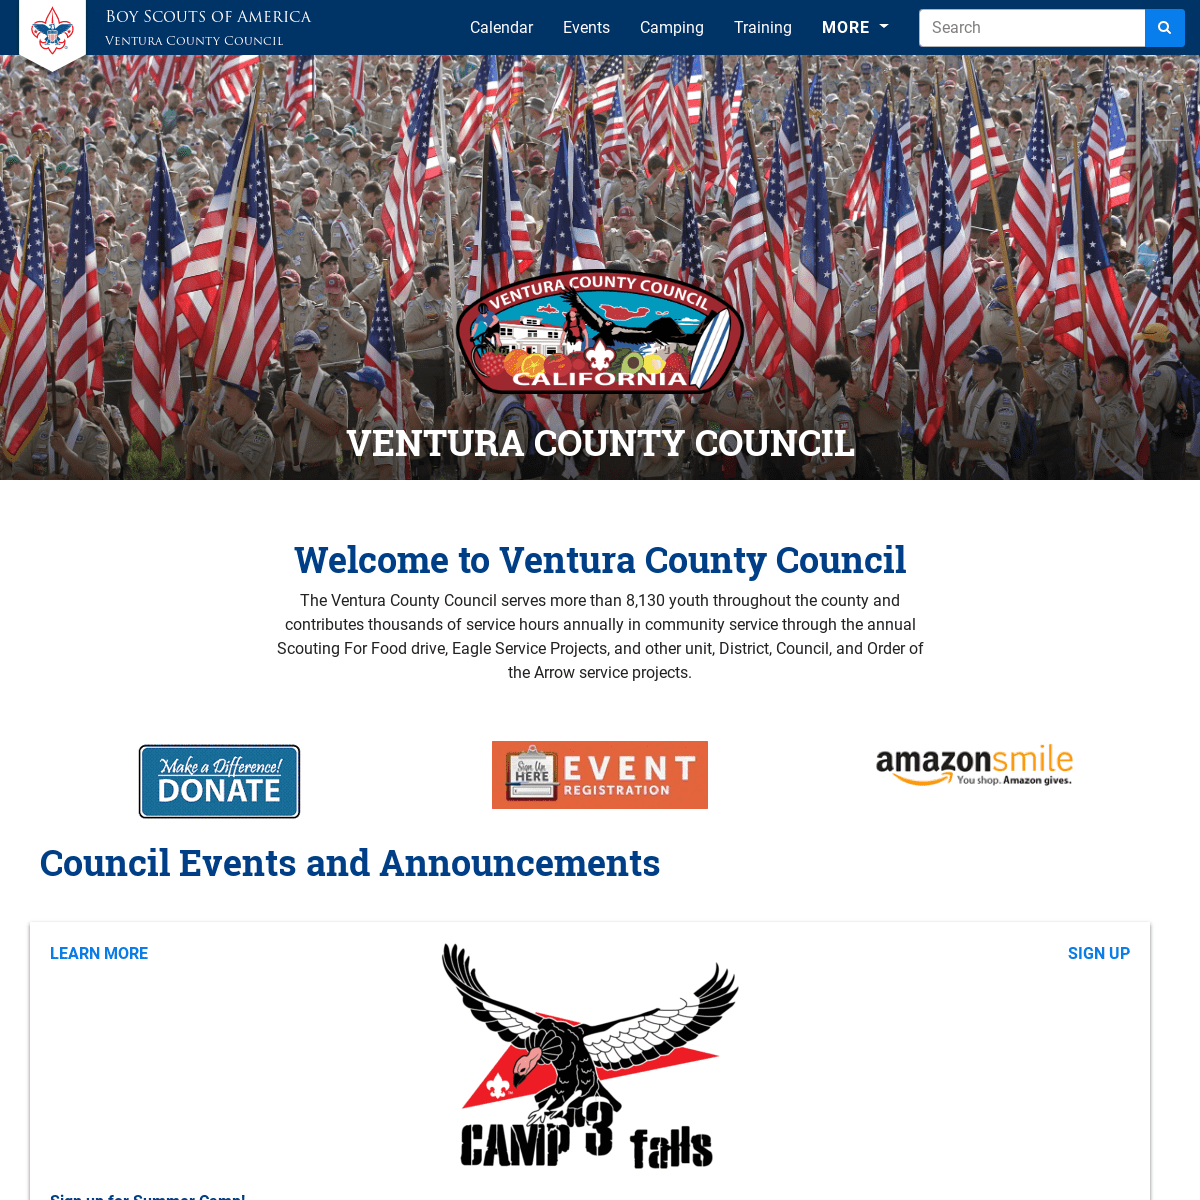 A complete backup of vccbsa.org